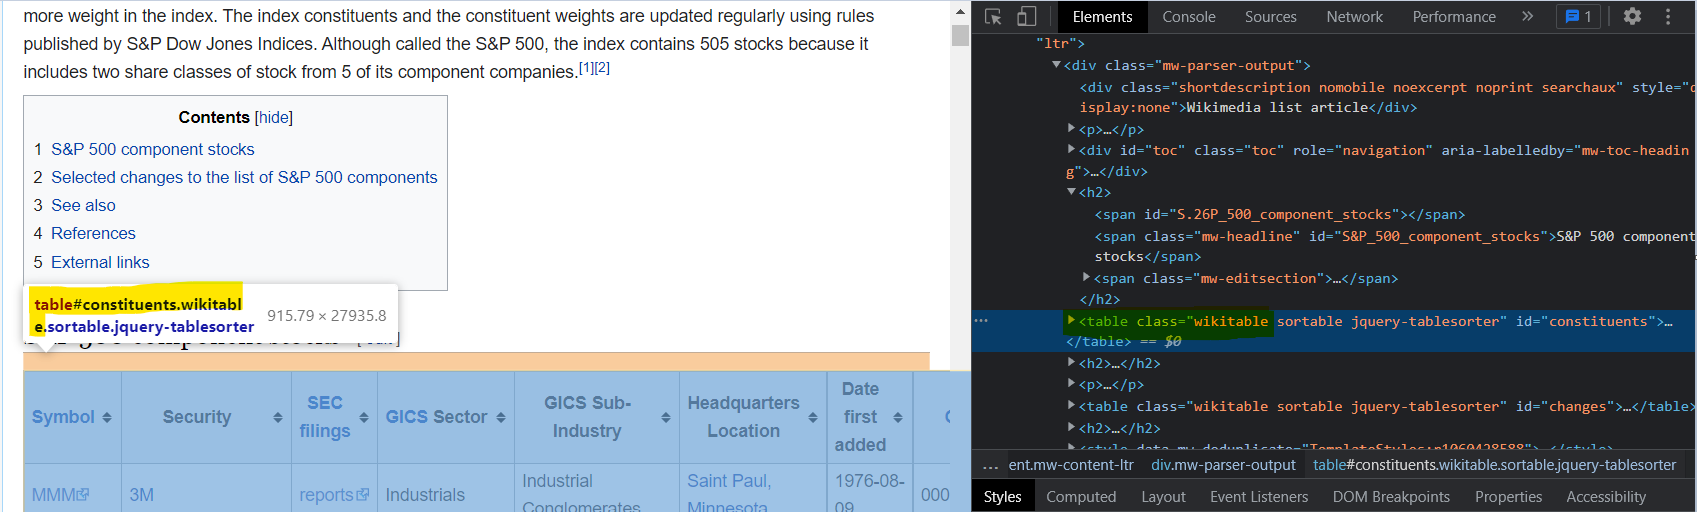 highlighted wikipedia HTML table class in screenshot that has inspect element options on